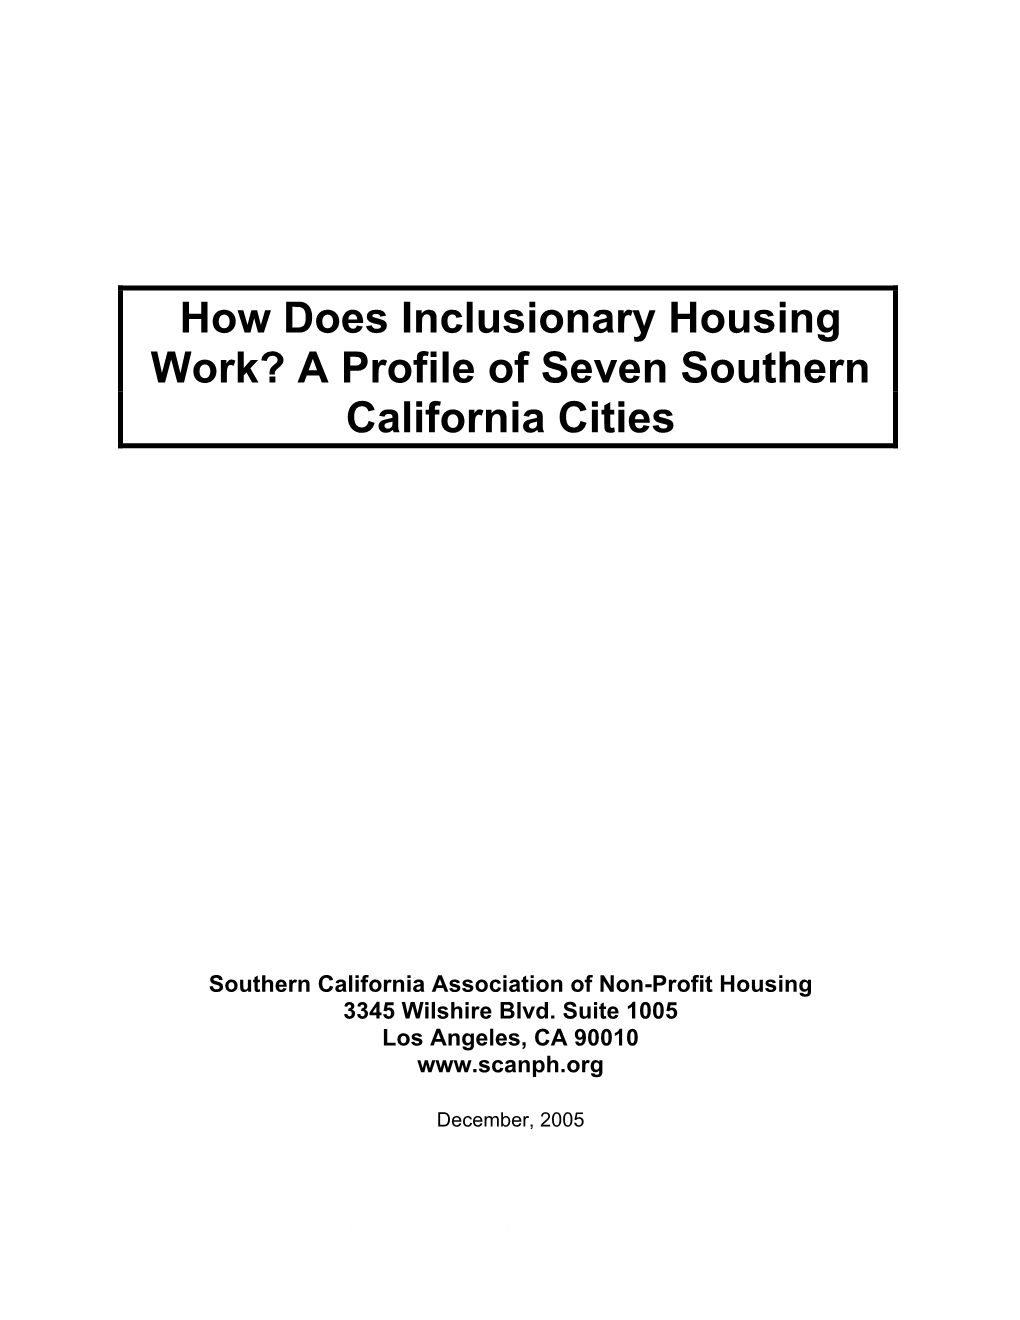 How Does Inclusionary Housing Work? a Profile of Seven Southern California Cities